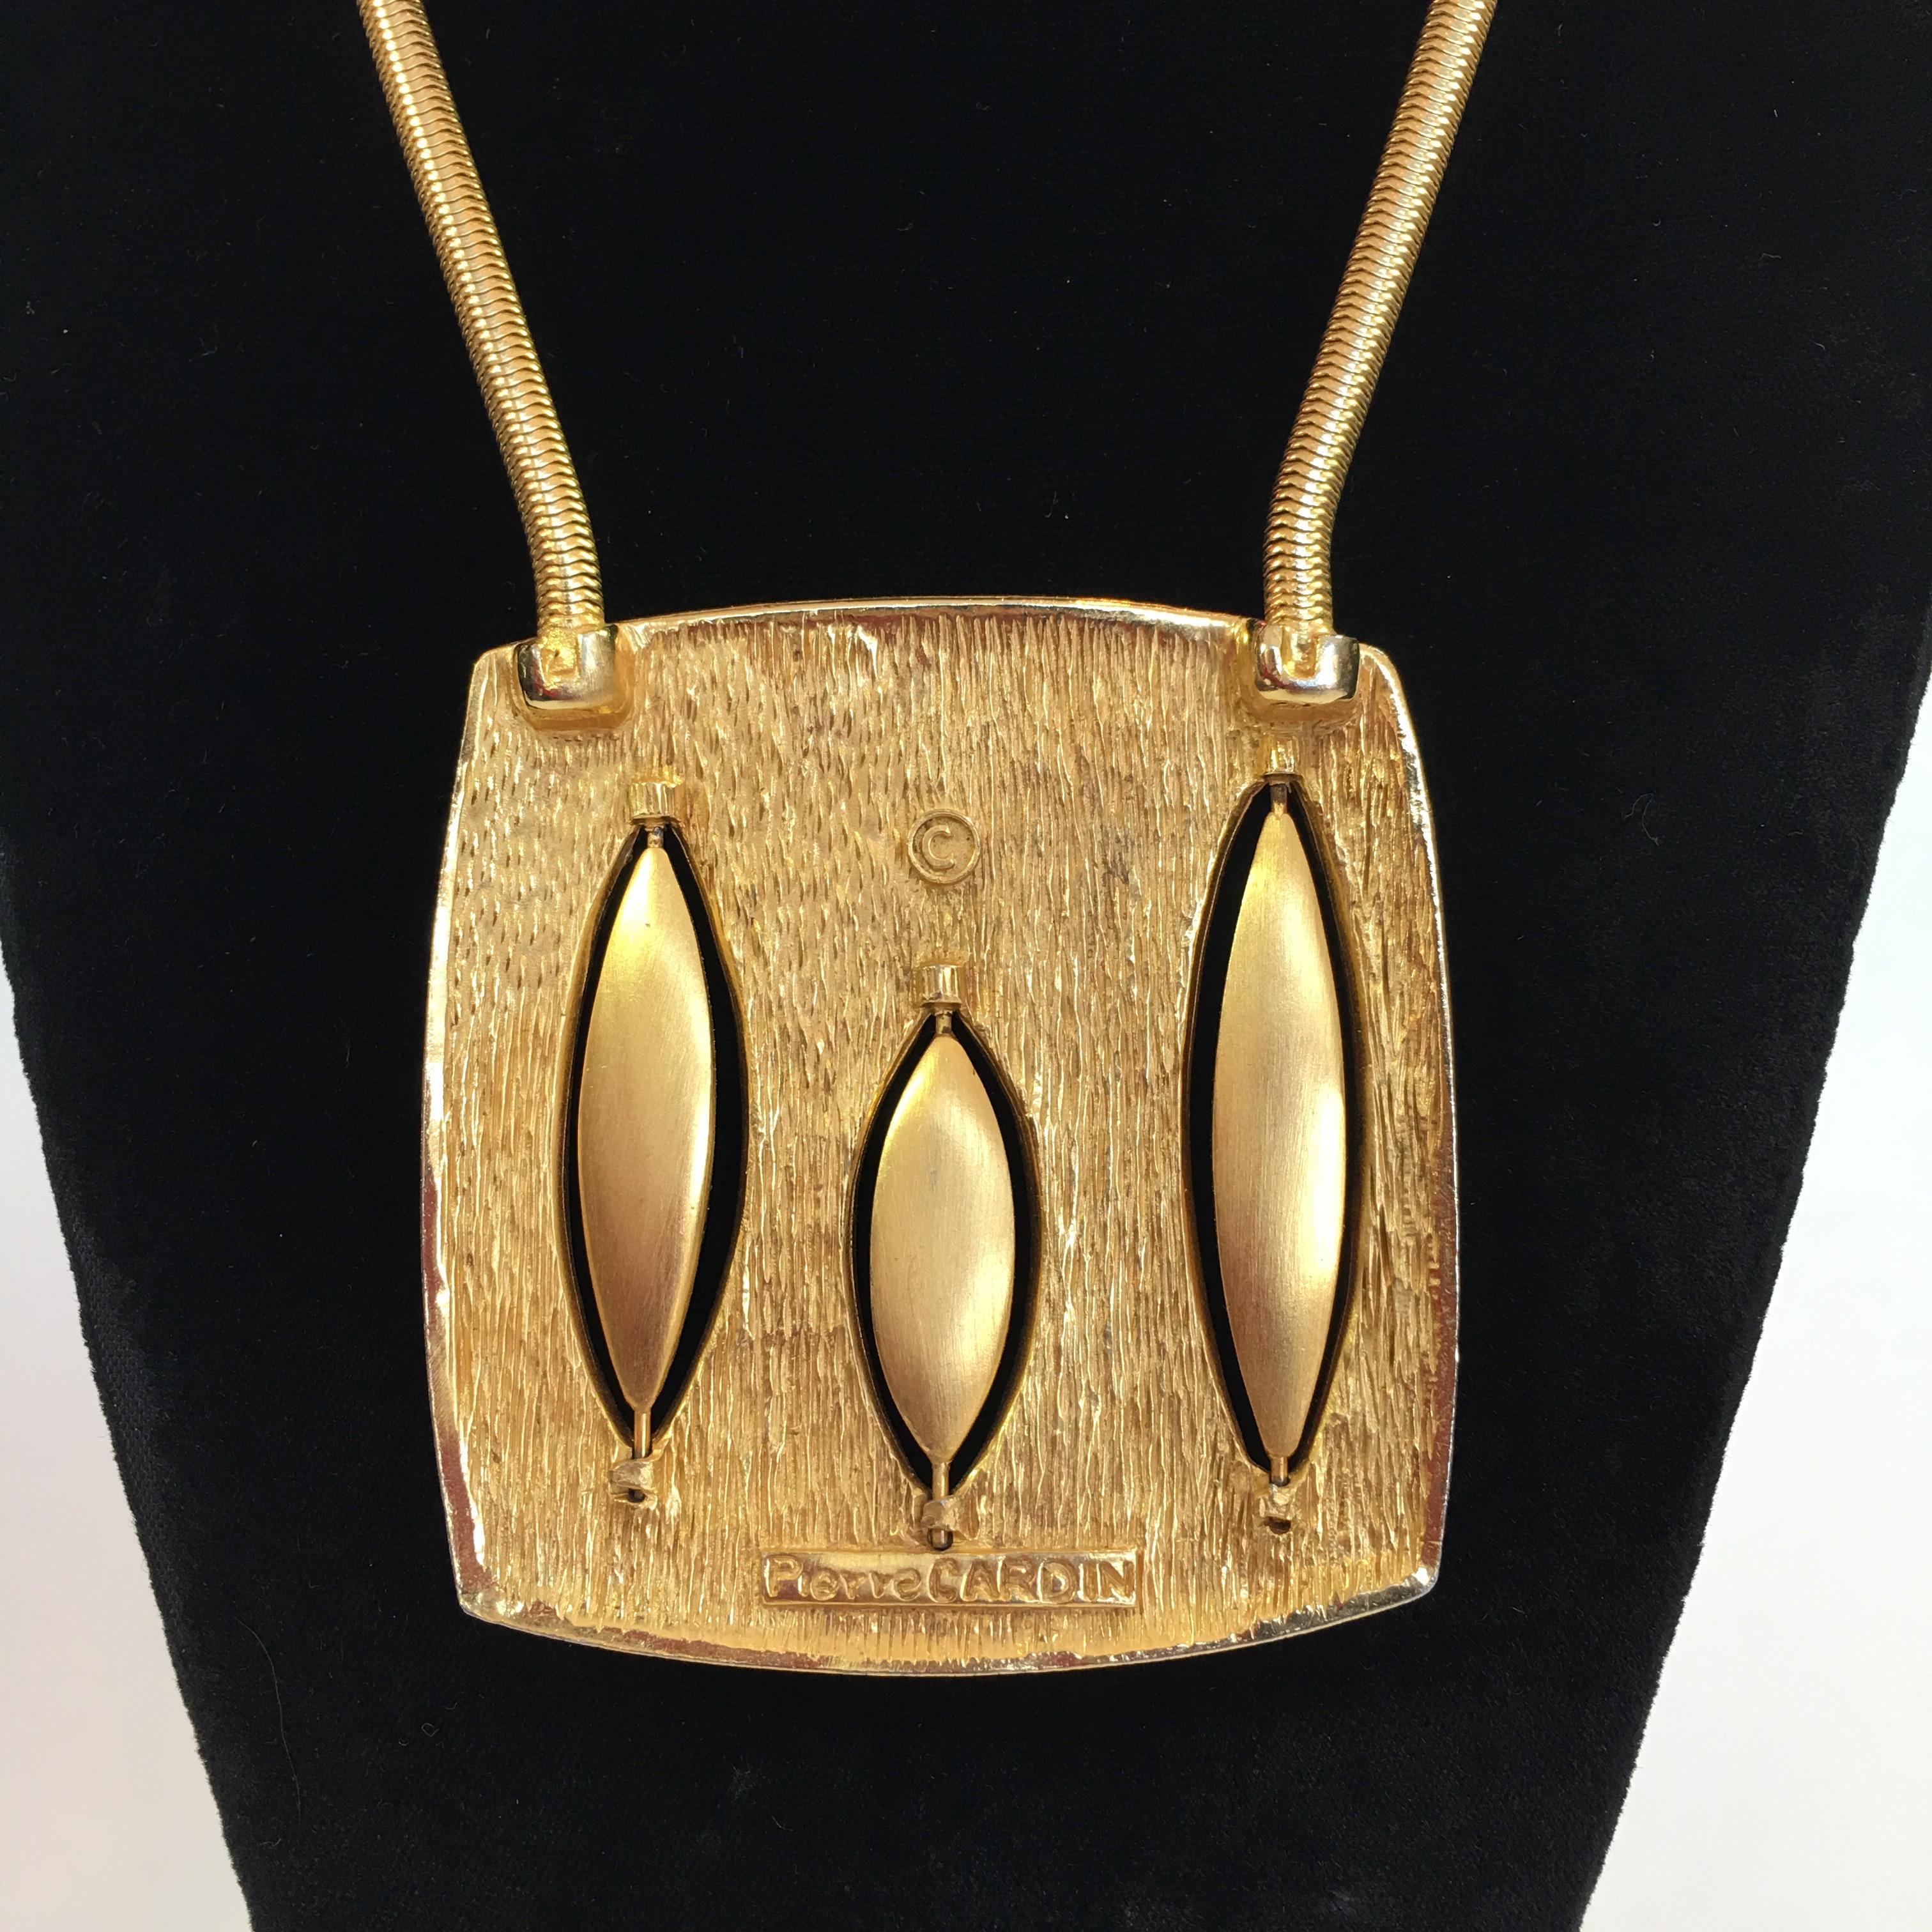 Pierre Cardin Mid-Century Modern Gold Tone + Enamel Necklace from the 1960's. Flat snake chain connected to each side of the pendant. Custom Cardin clasp at back of neck. 
Necklace is in very good vintage condition.

Measurements are as